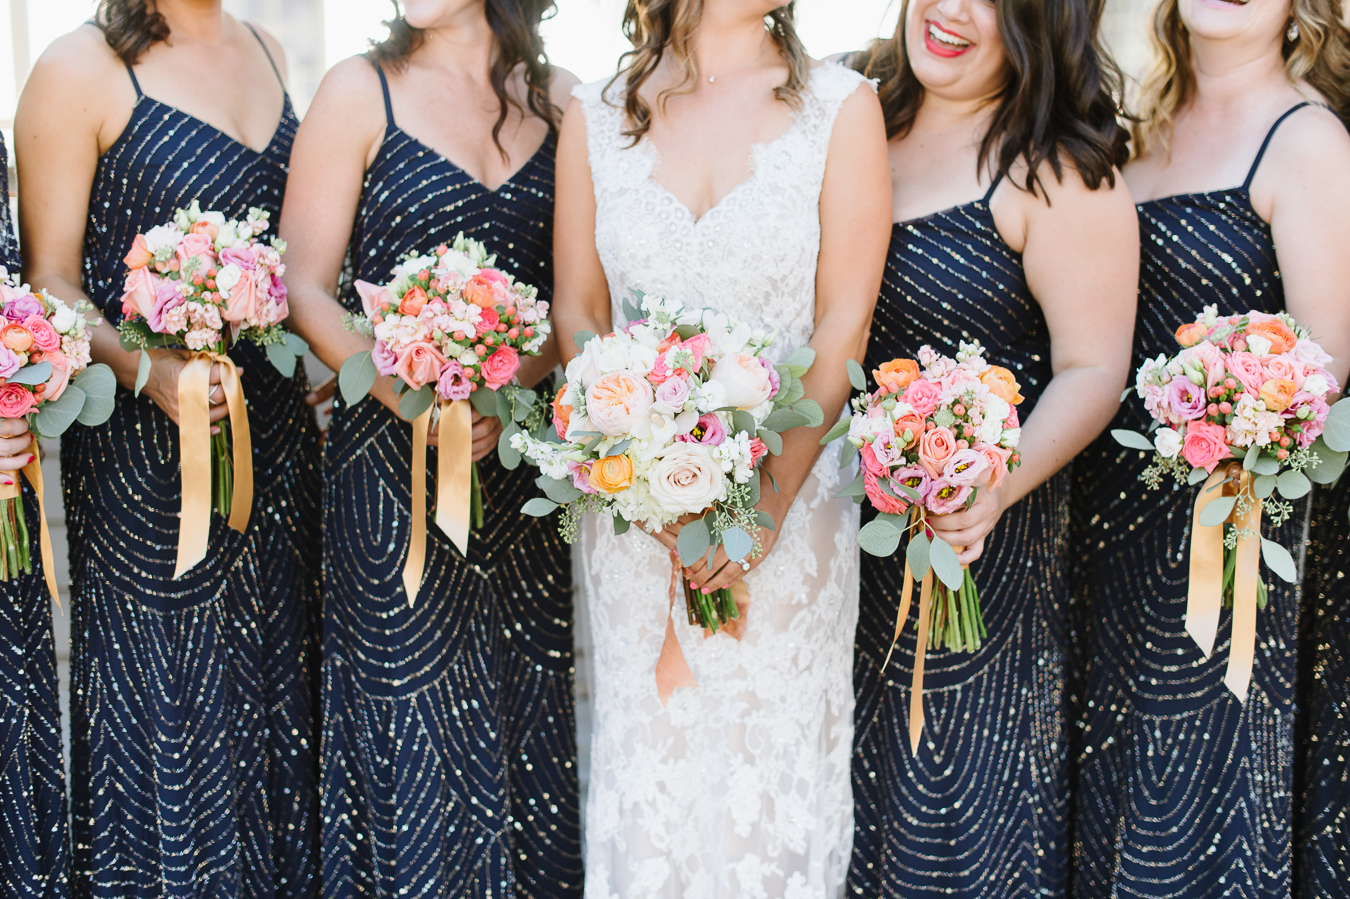 Adrianna Papell Bridesmaids Dress with Sequins and Beading | Natalie Franke